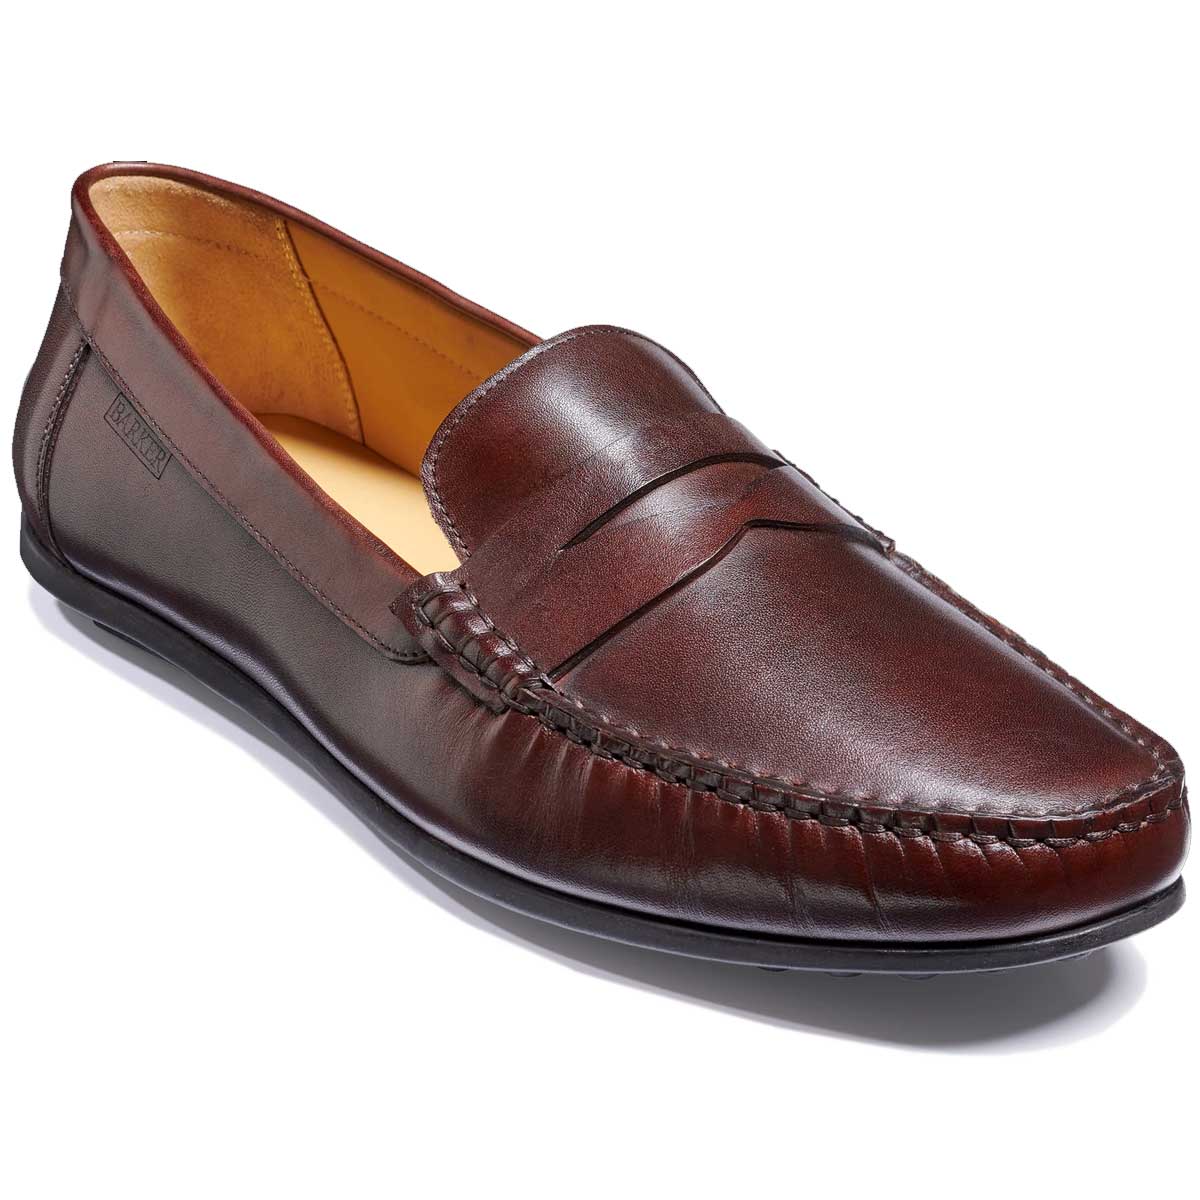 BARKER Jamie Driving Shoes - Mens - Chestnut Hand Painted